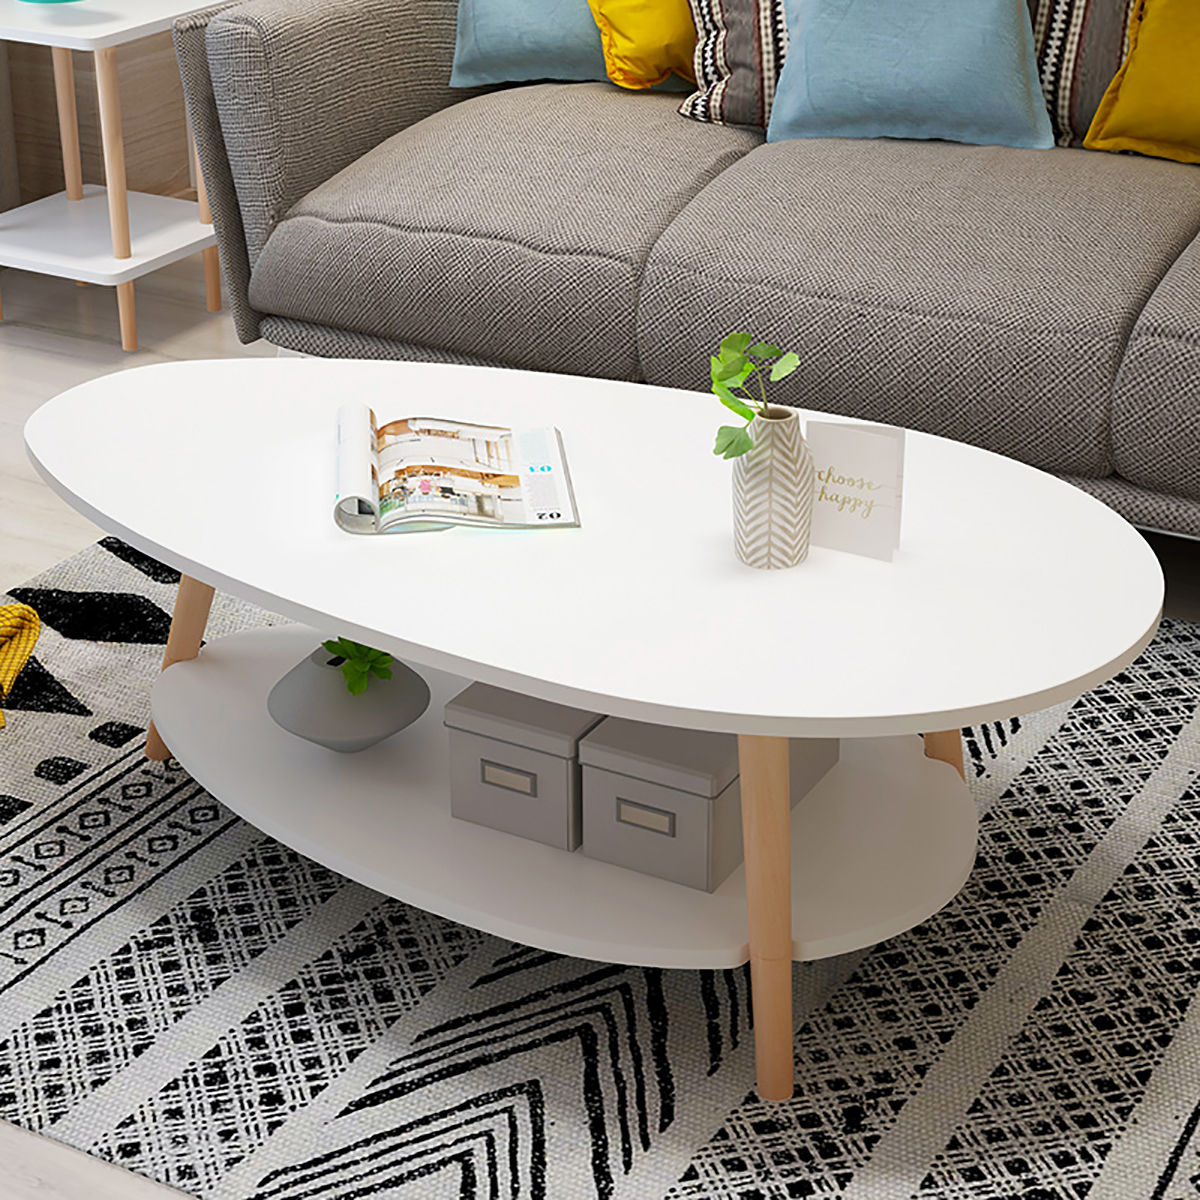 Double-Layers-Coffee-Table-Modern-Laptop-Desk-Living-Room-Round-Table-Writing-Study-Table-Storage-Ra-1752142-5